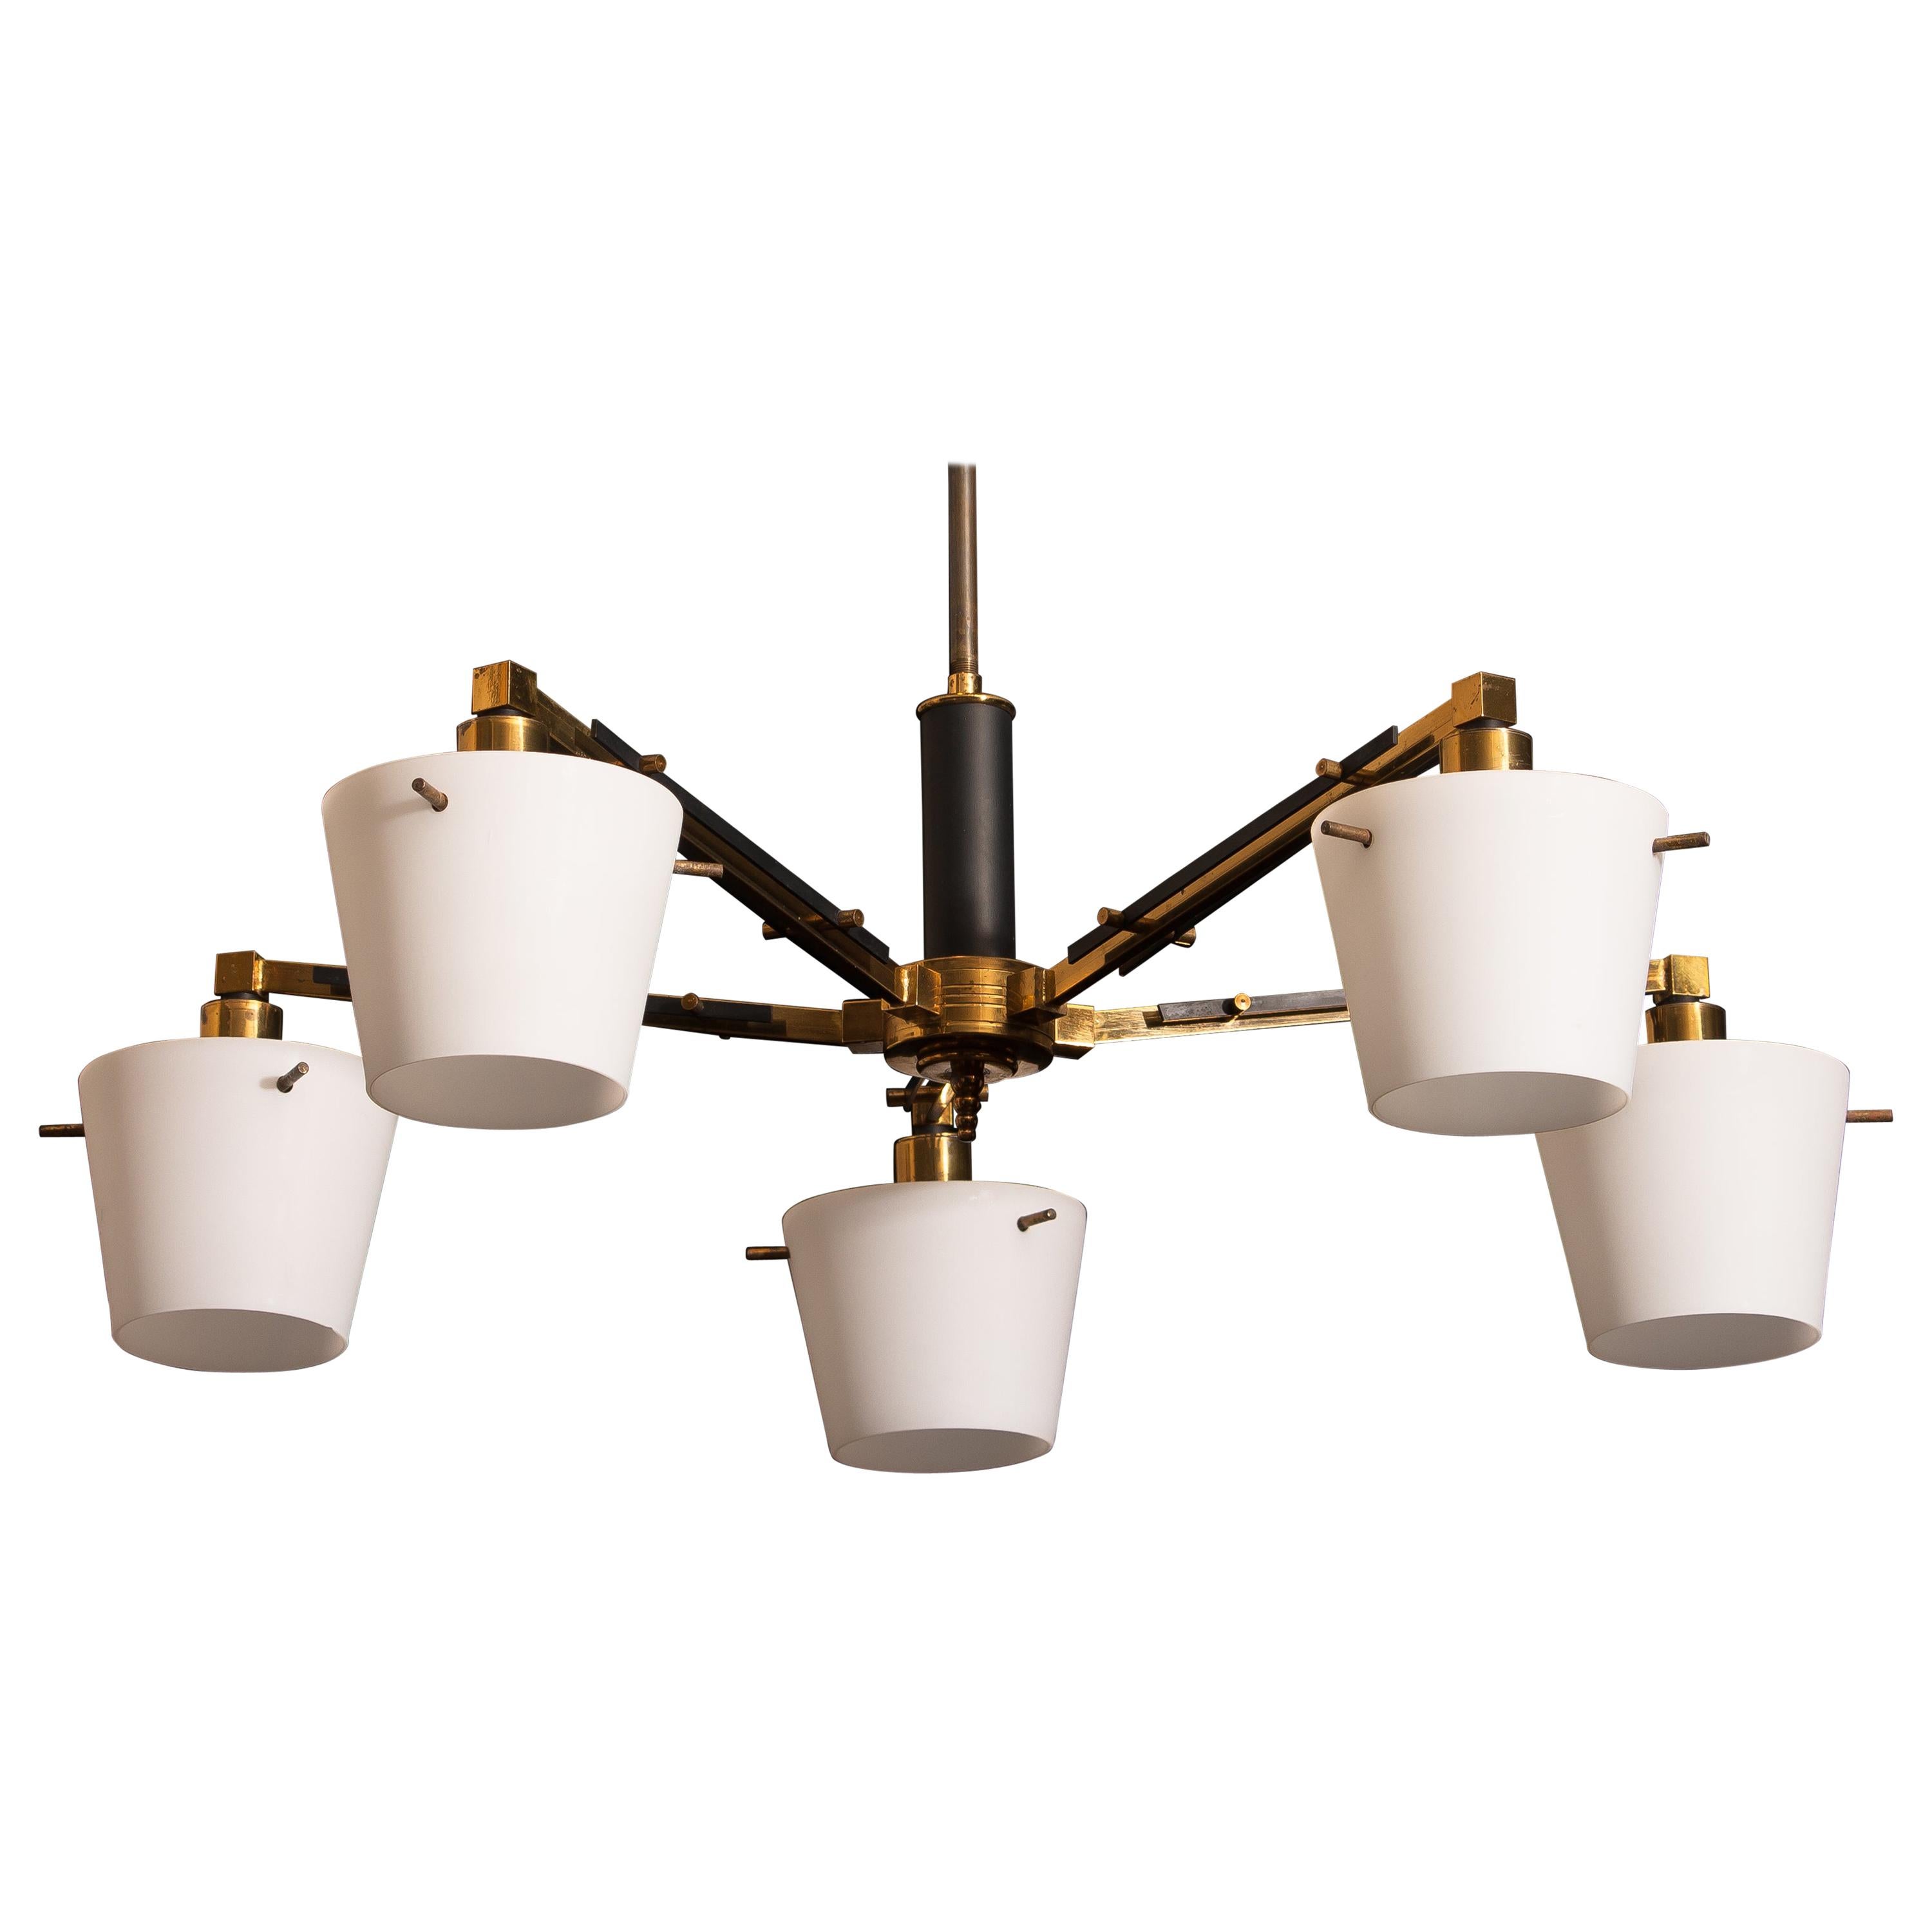 Beautiful and original midcentury chandelier with five frosted white glass shades on a brass frame by Stilnovo, Italy. Period: 1950s. Five-light.
Technical 100% / E14 / 17.
The dimensions are Ø of the fixture, 65 cm / 26 inch. Total height 70 cm /